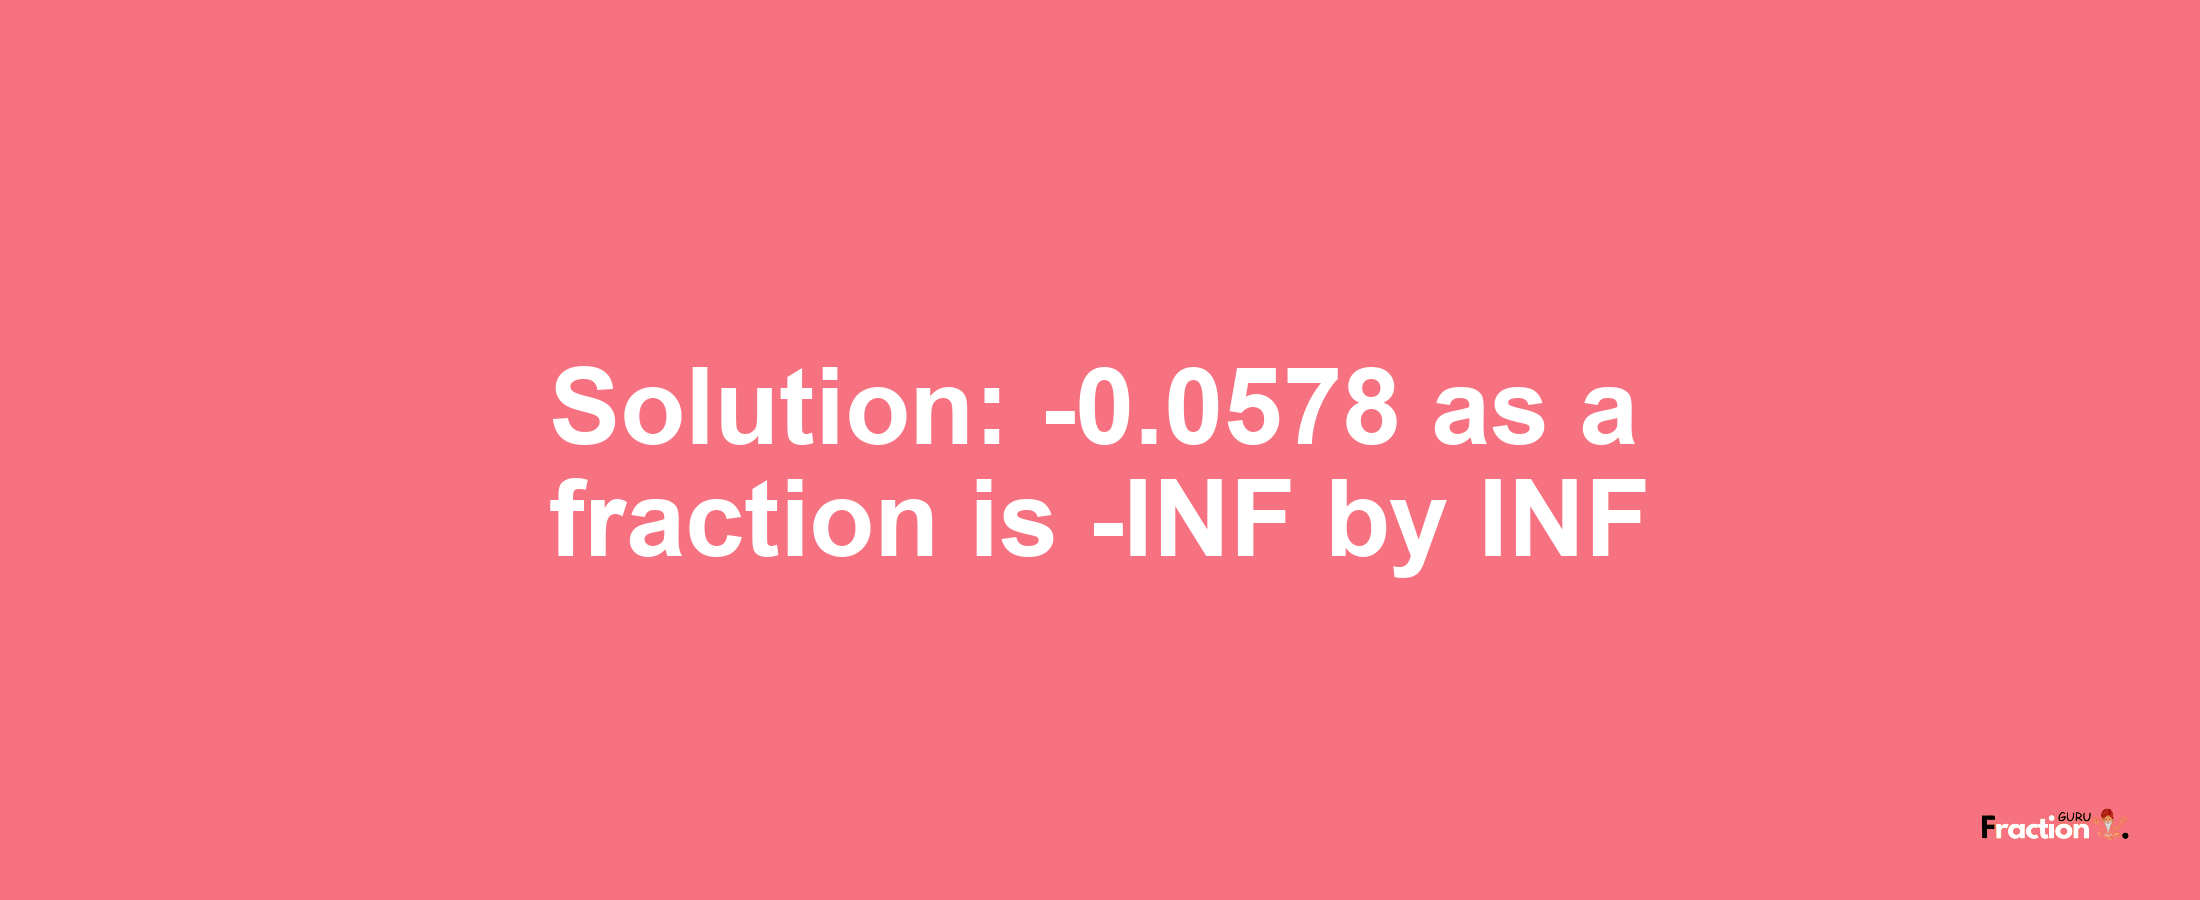 Solution:-0.0578 as a fraction is -INF/INF